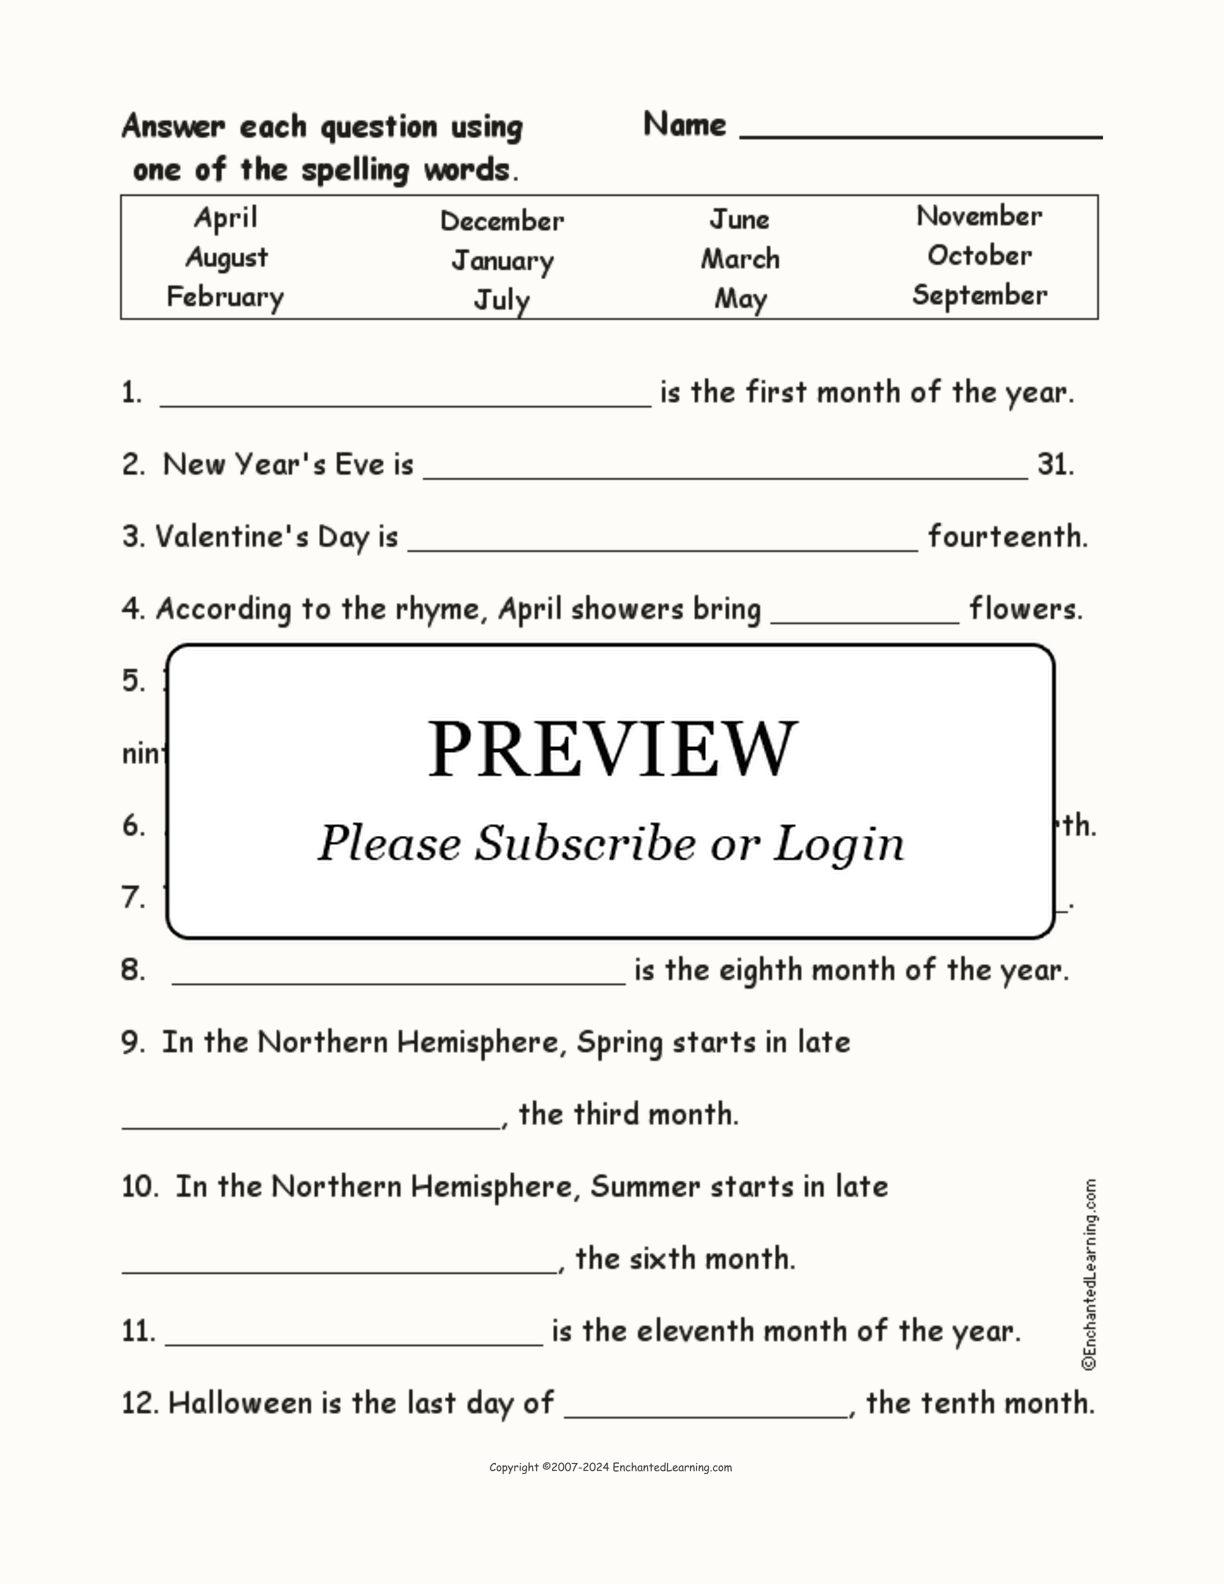 The Months: Spelling Word Questions interactive worksheet page 1